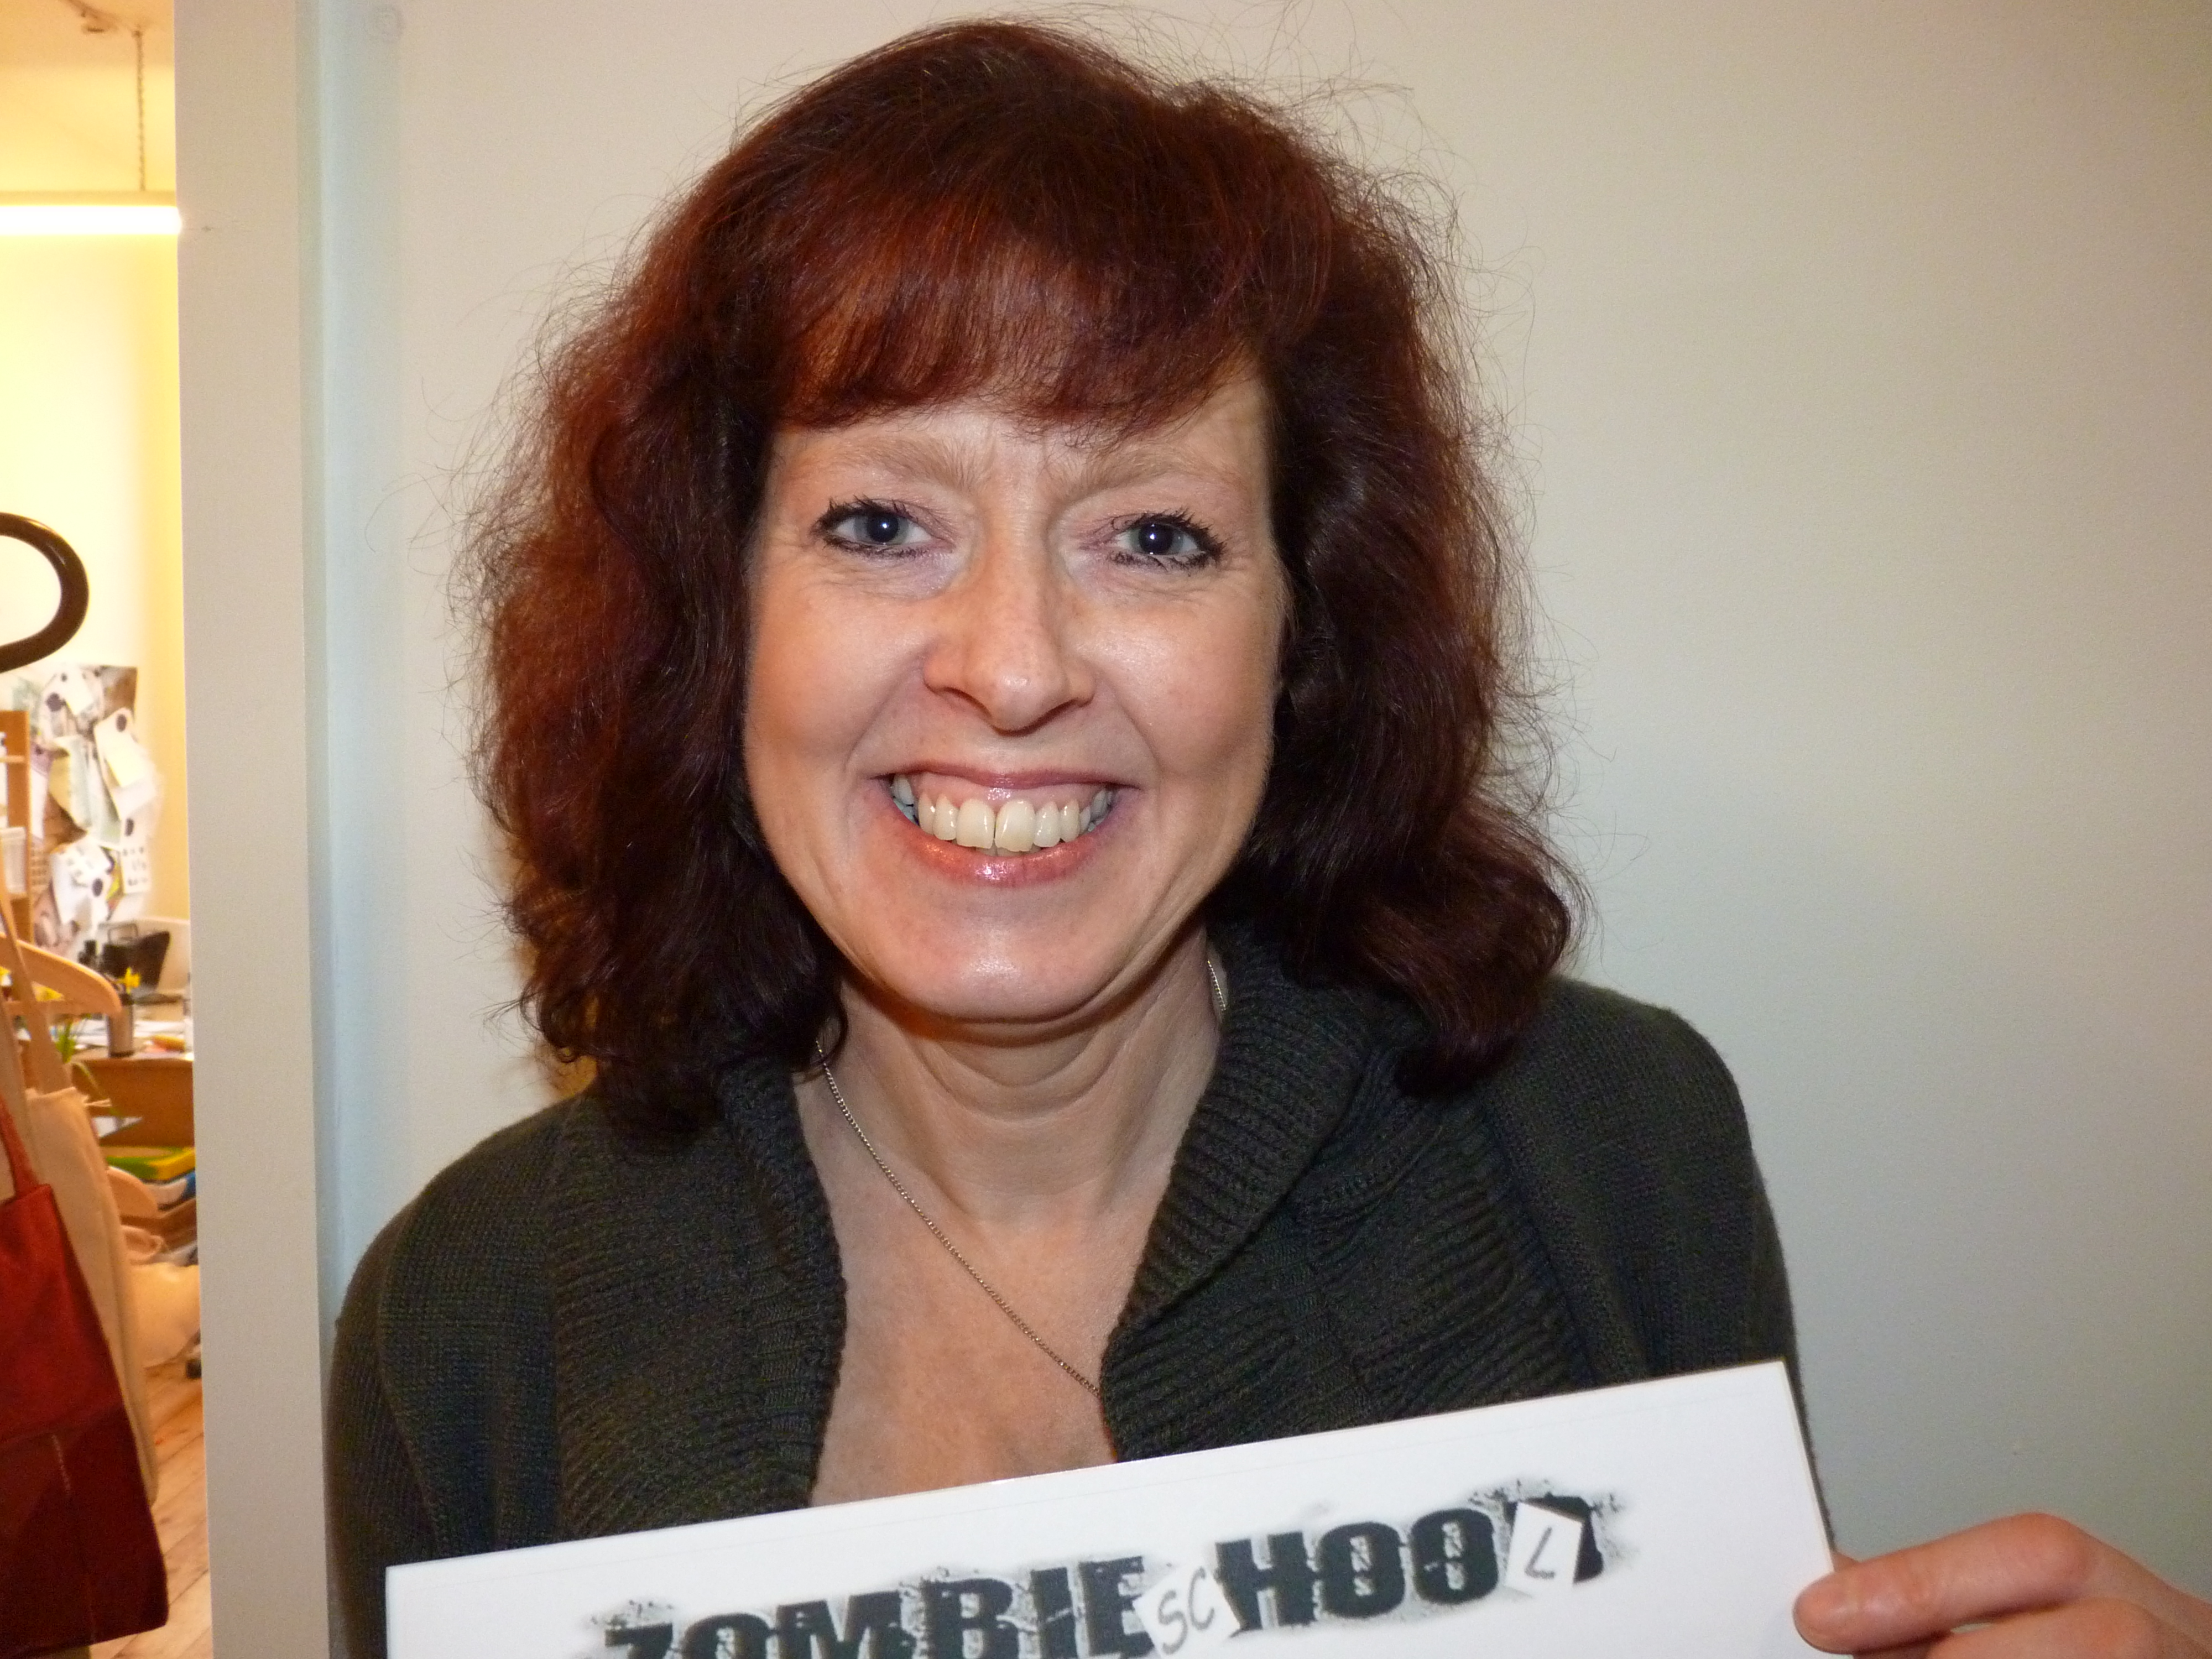 sue prunty auditioning for zombie school and zombiehood